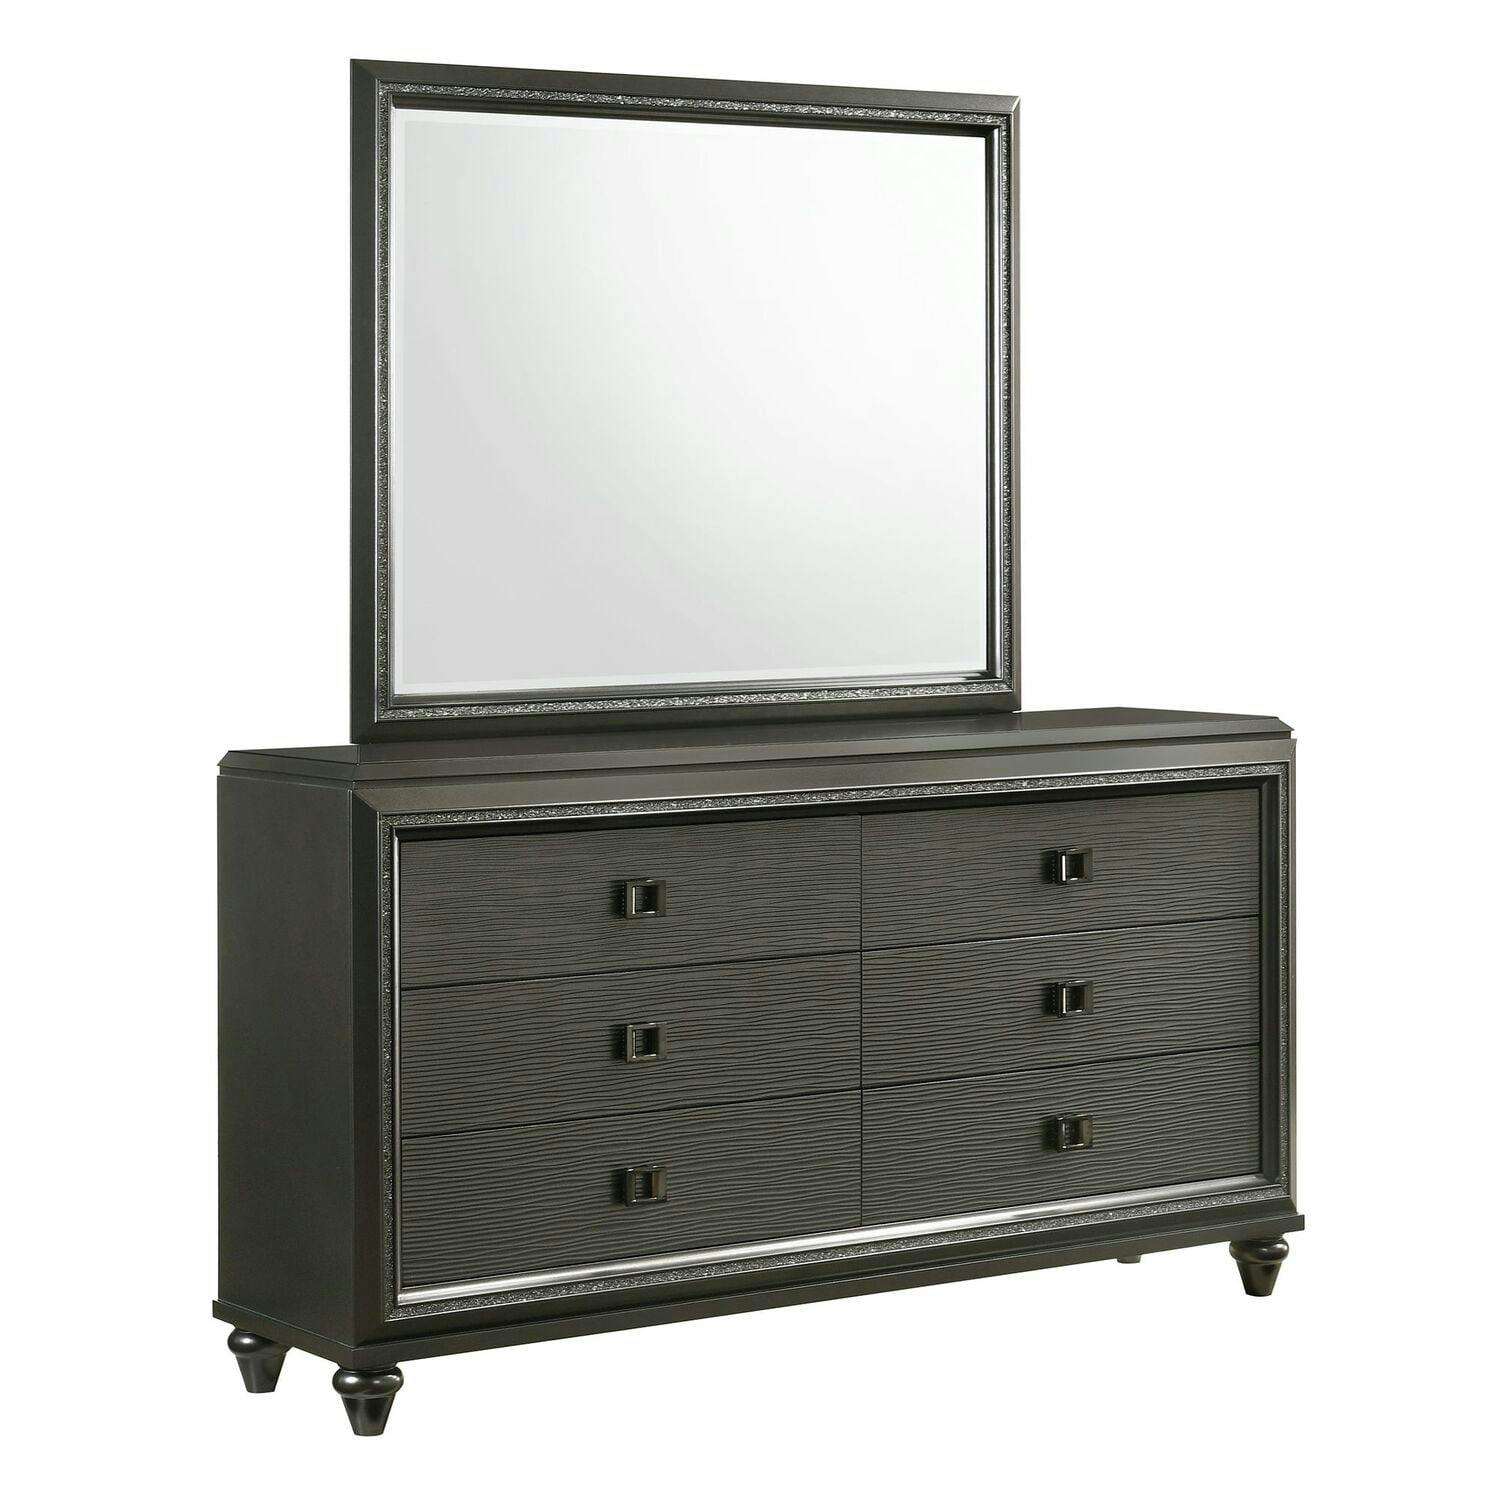 Transitional Moonstone Double Dresser with Felt-Lined Drawers and Mirror in Black